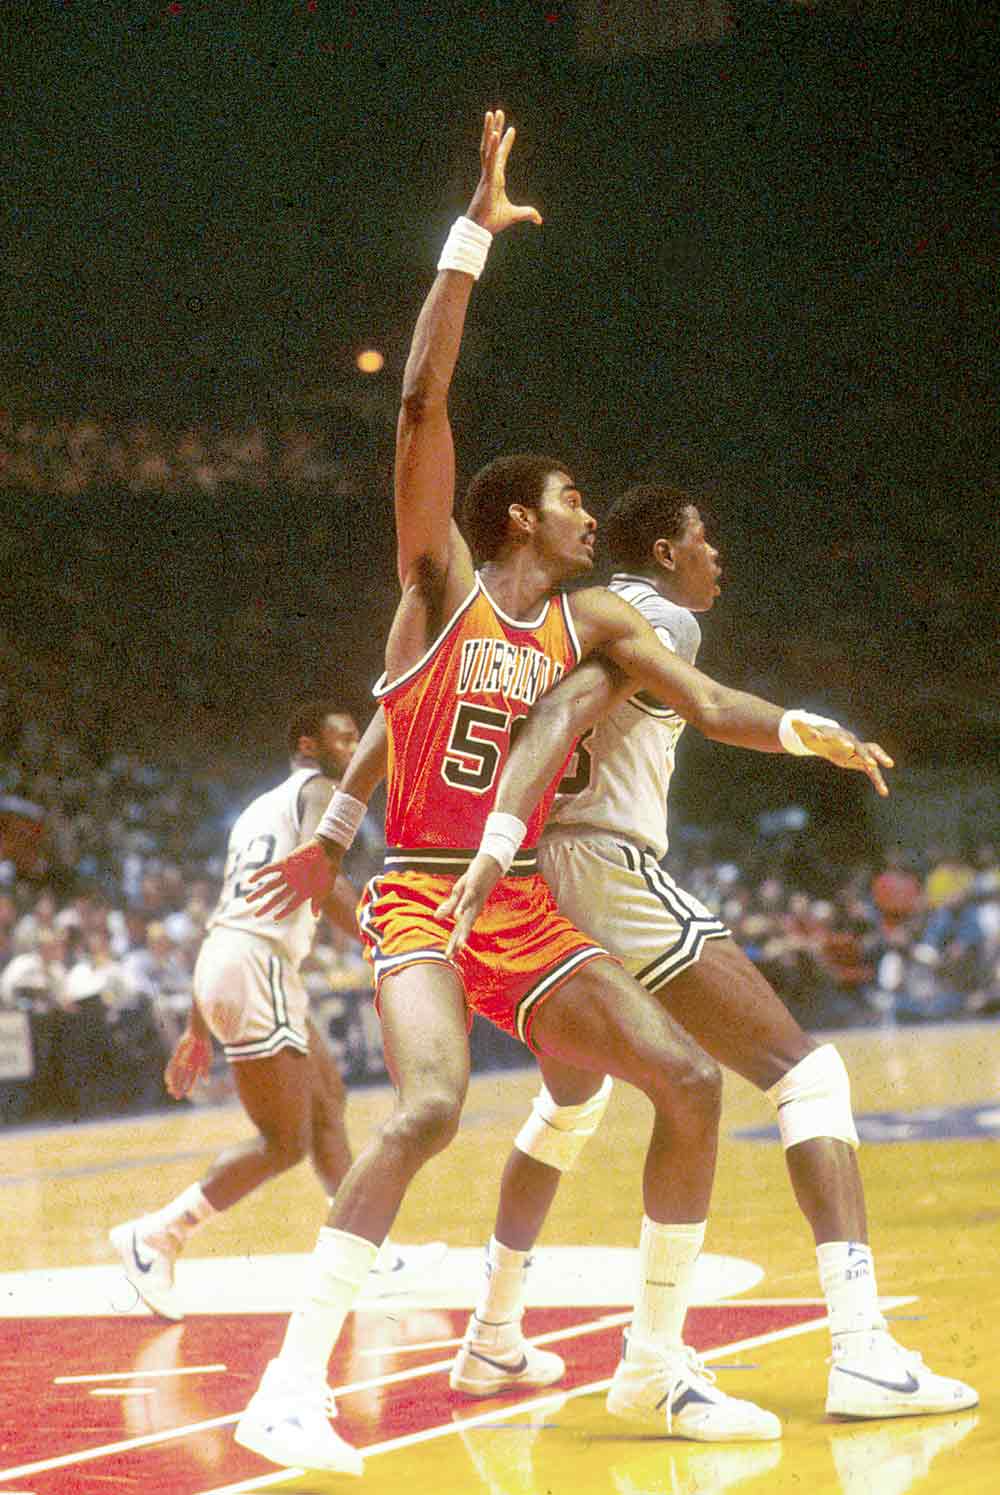 Ralph Sampson and Ewing blocking each other during a game